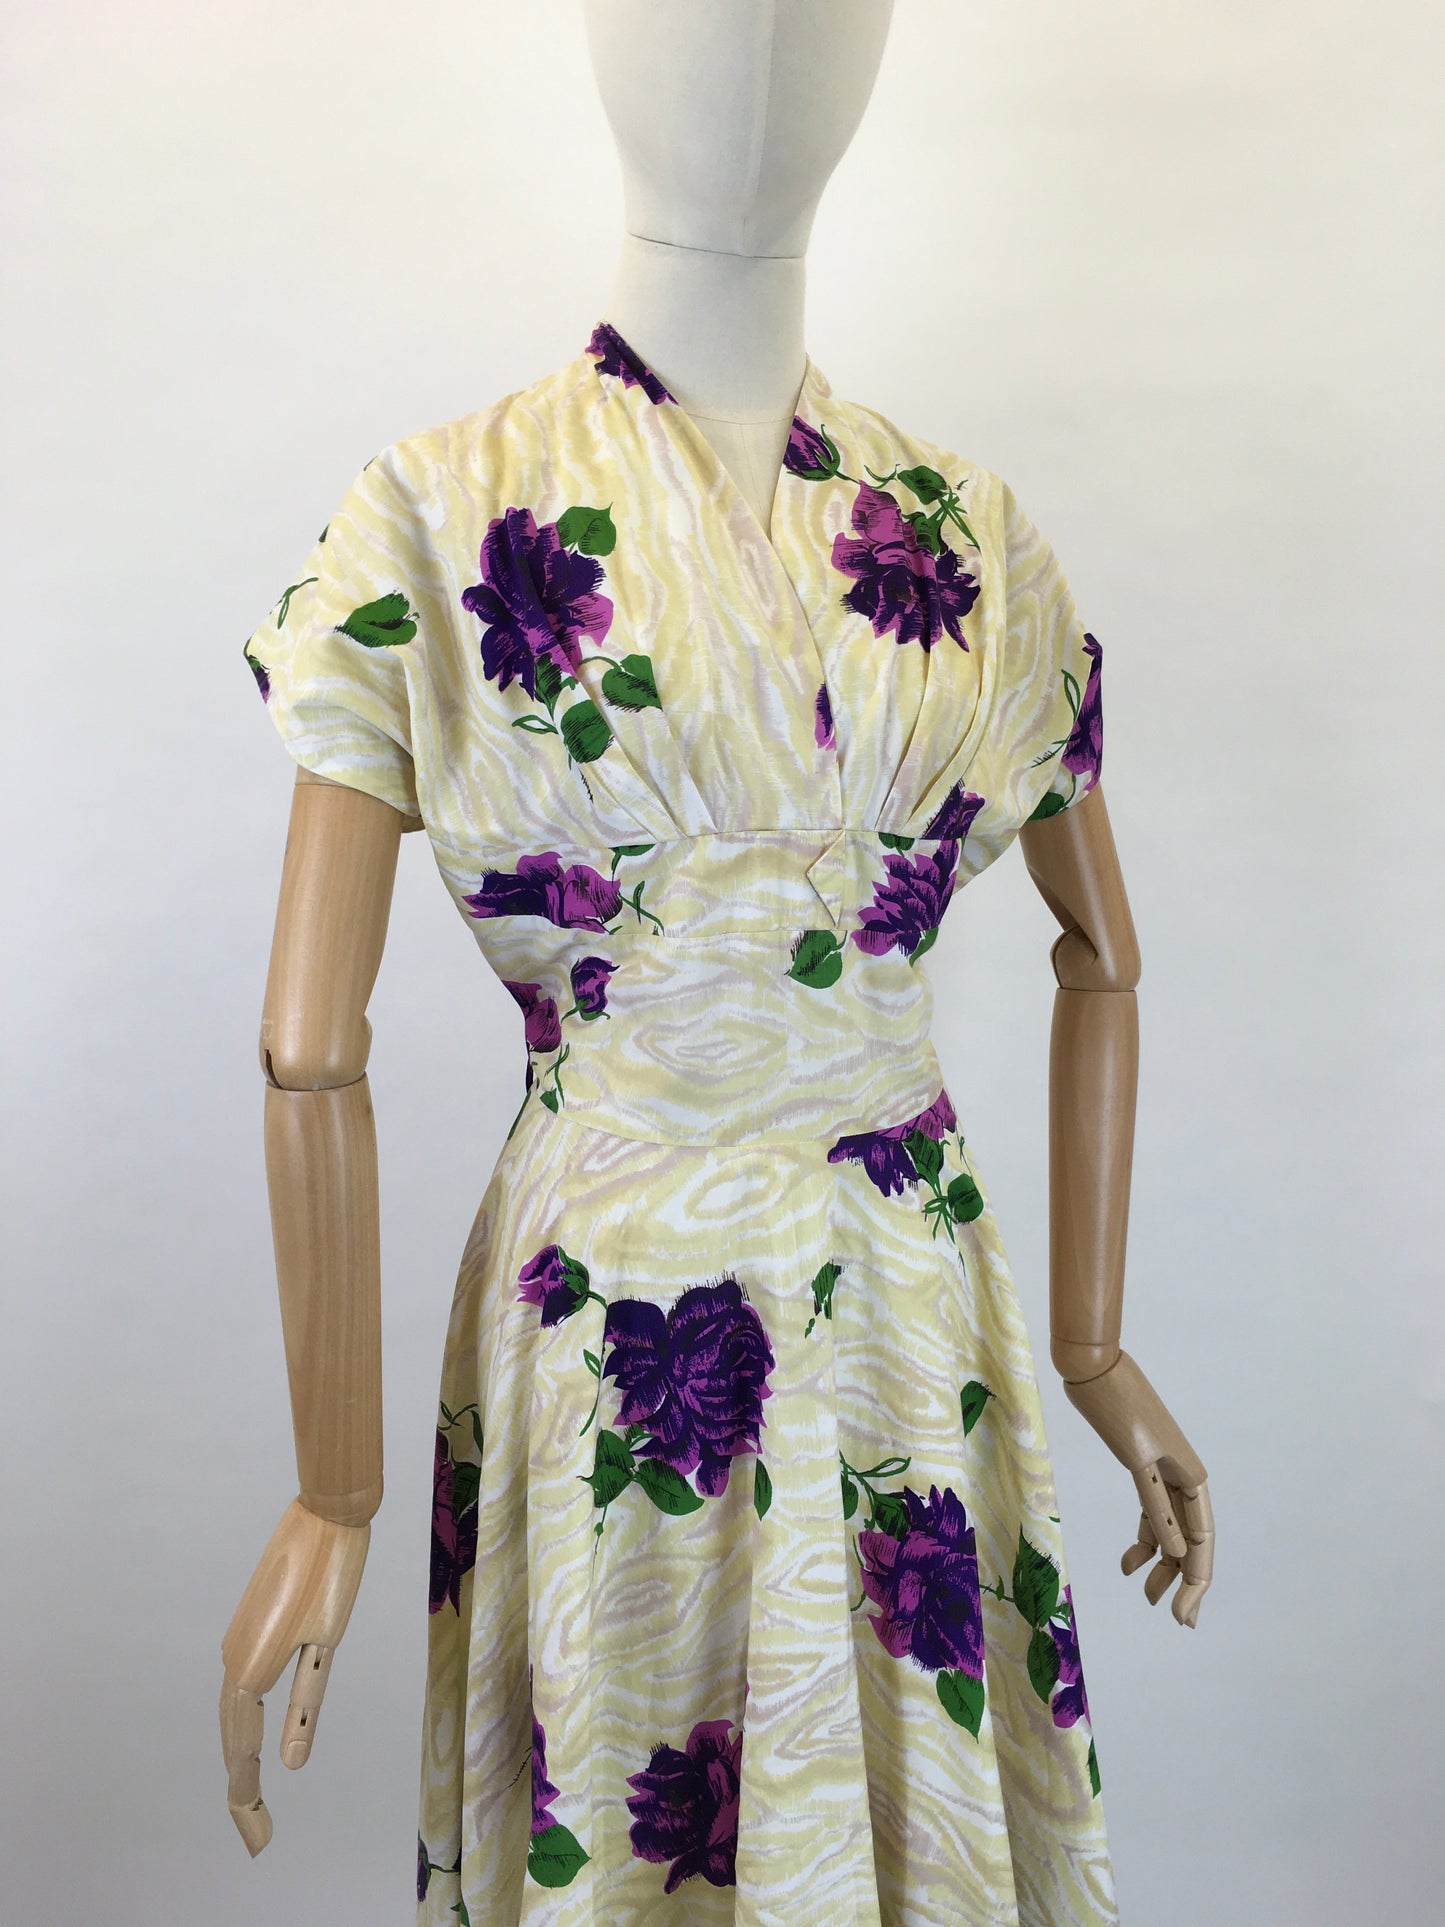 Original 1950s Darling Dress By ‘ Coopella’ - In a Lightweight Cotton In Yellow Swirls with Rich Purple Roses